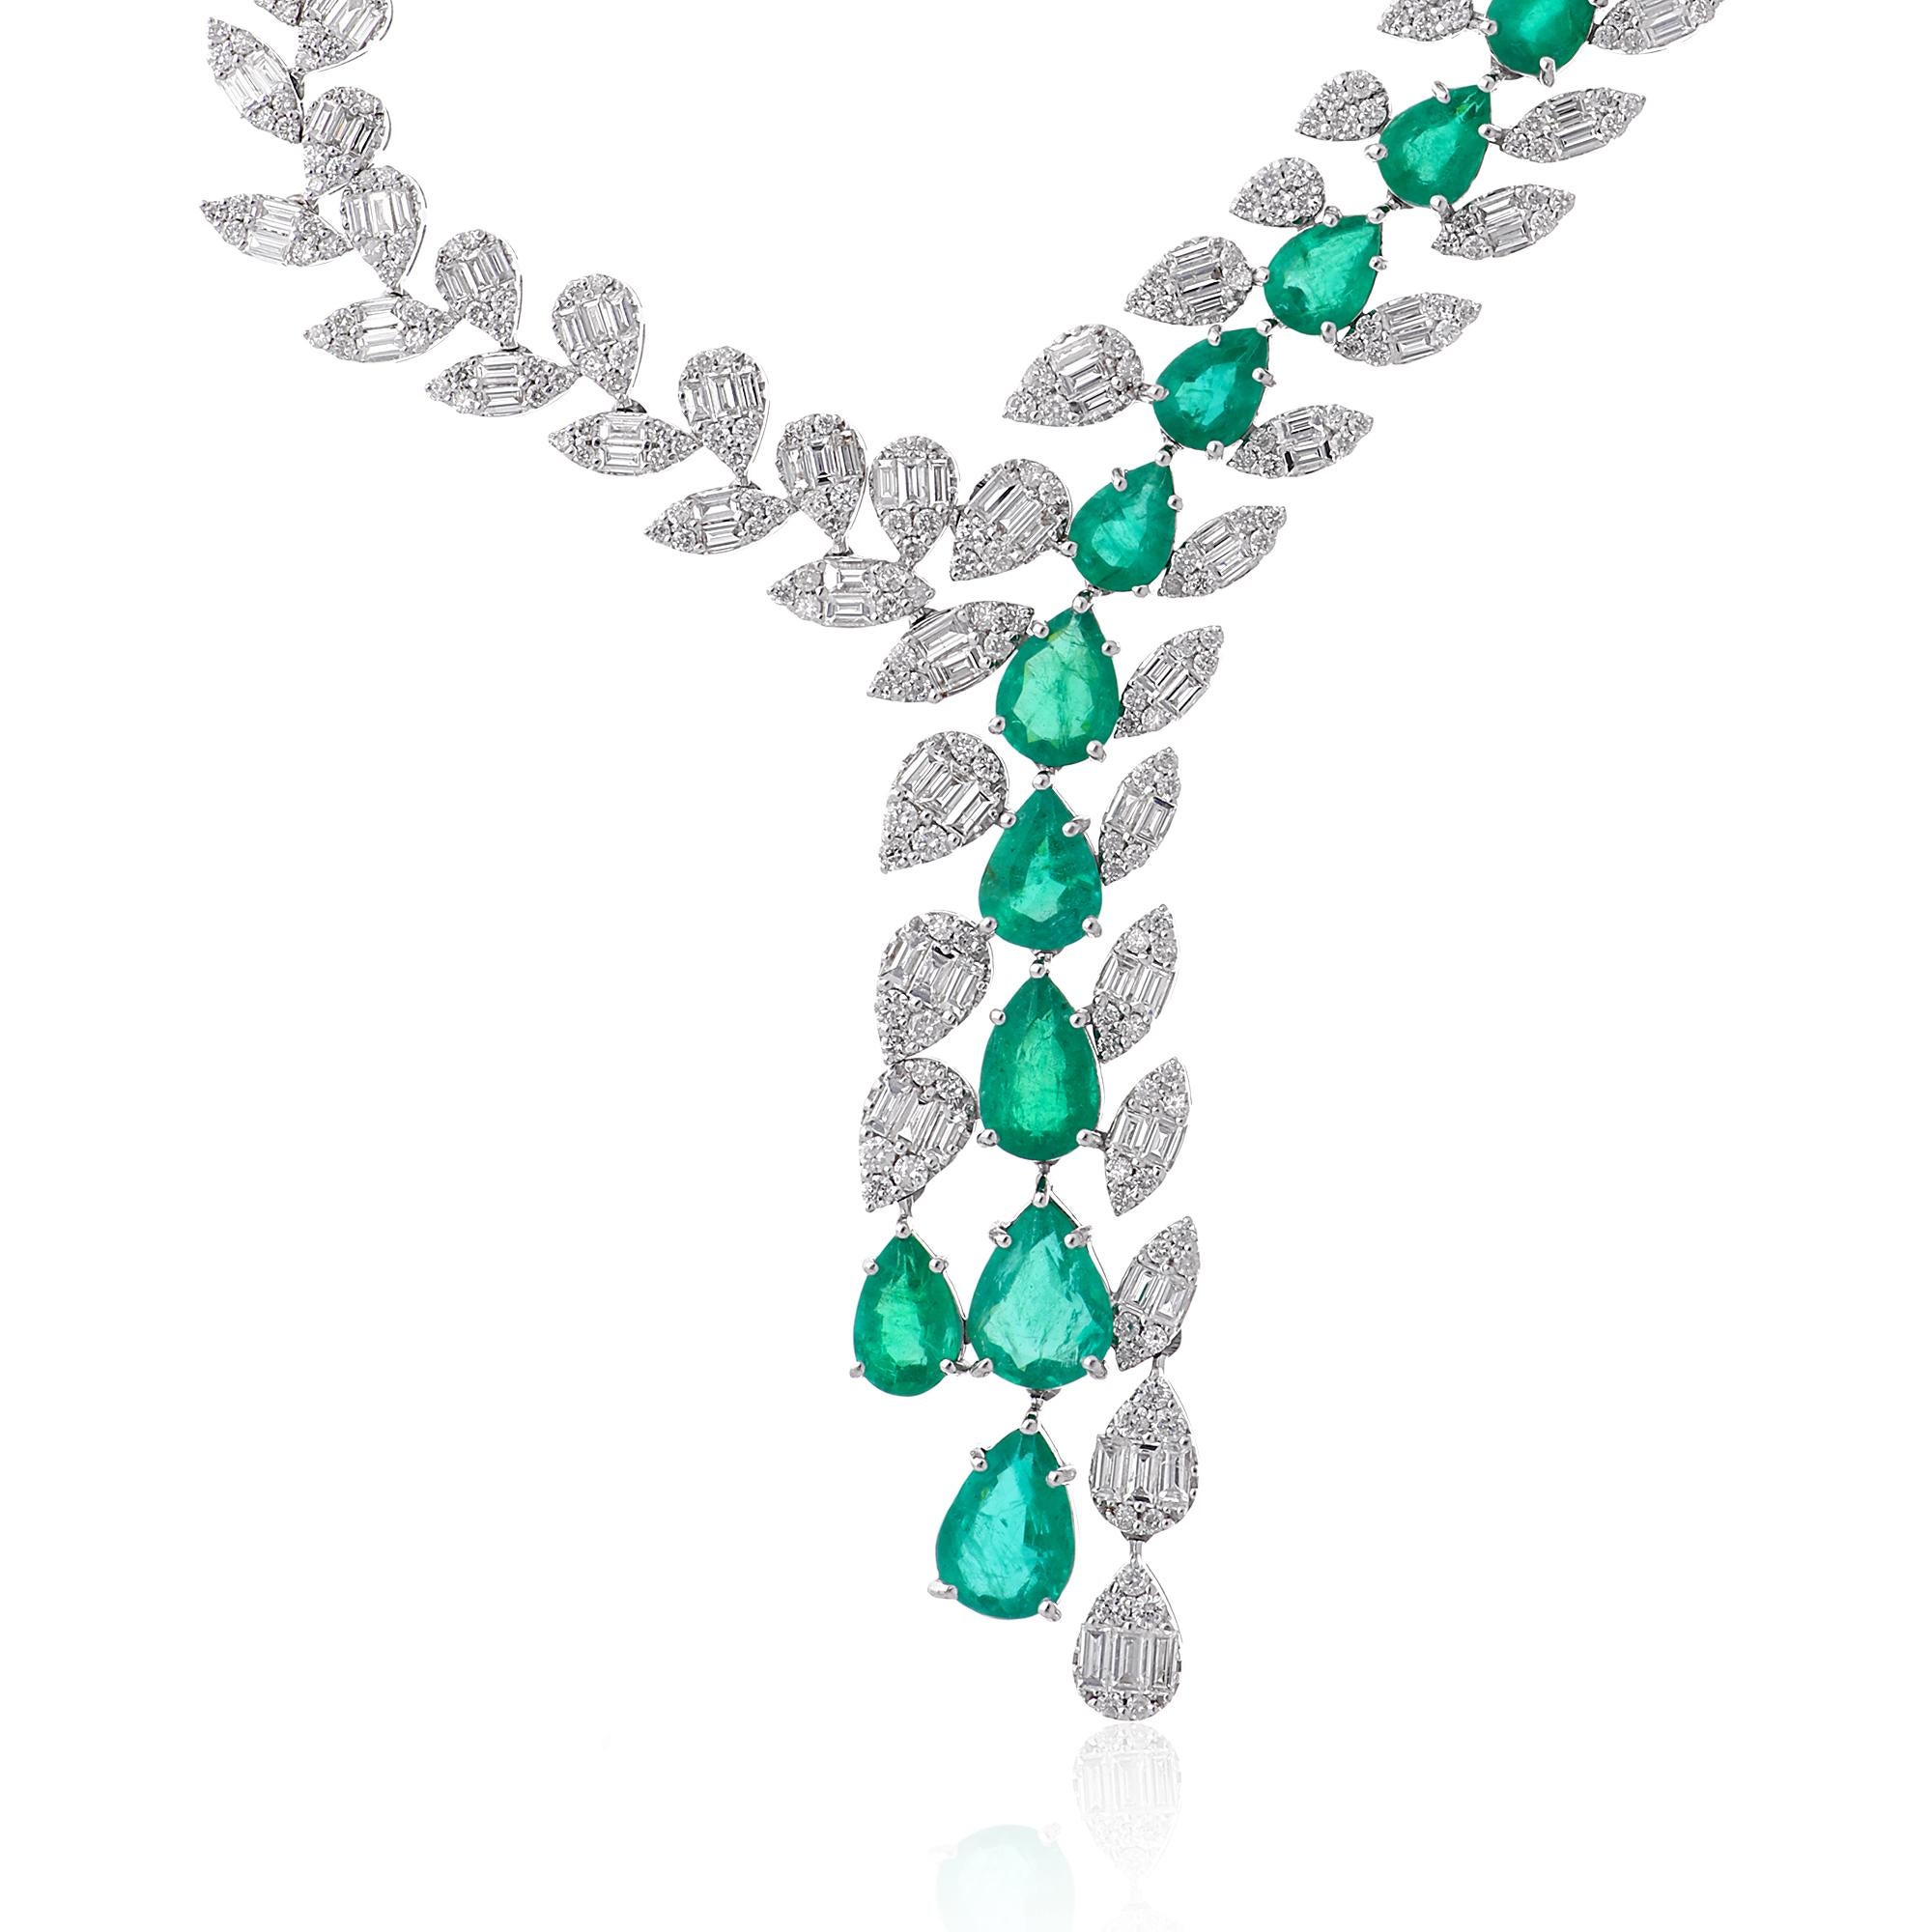 Introducing our exquisite natural pear emerald necklace with baguette diamonds, a stunning piece of fine jewelry crafted in 14 karat white gold. This necklace showcases the timeless beauty of emeralds and the brilliance of baguette diamonds,